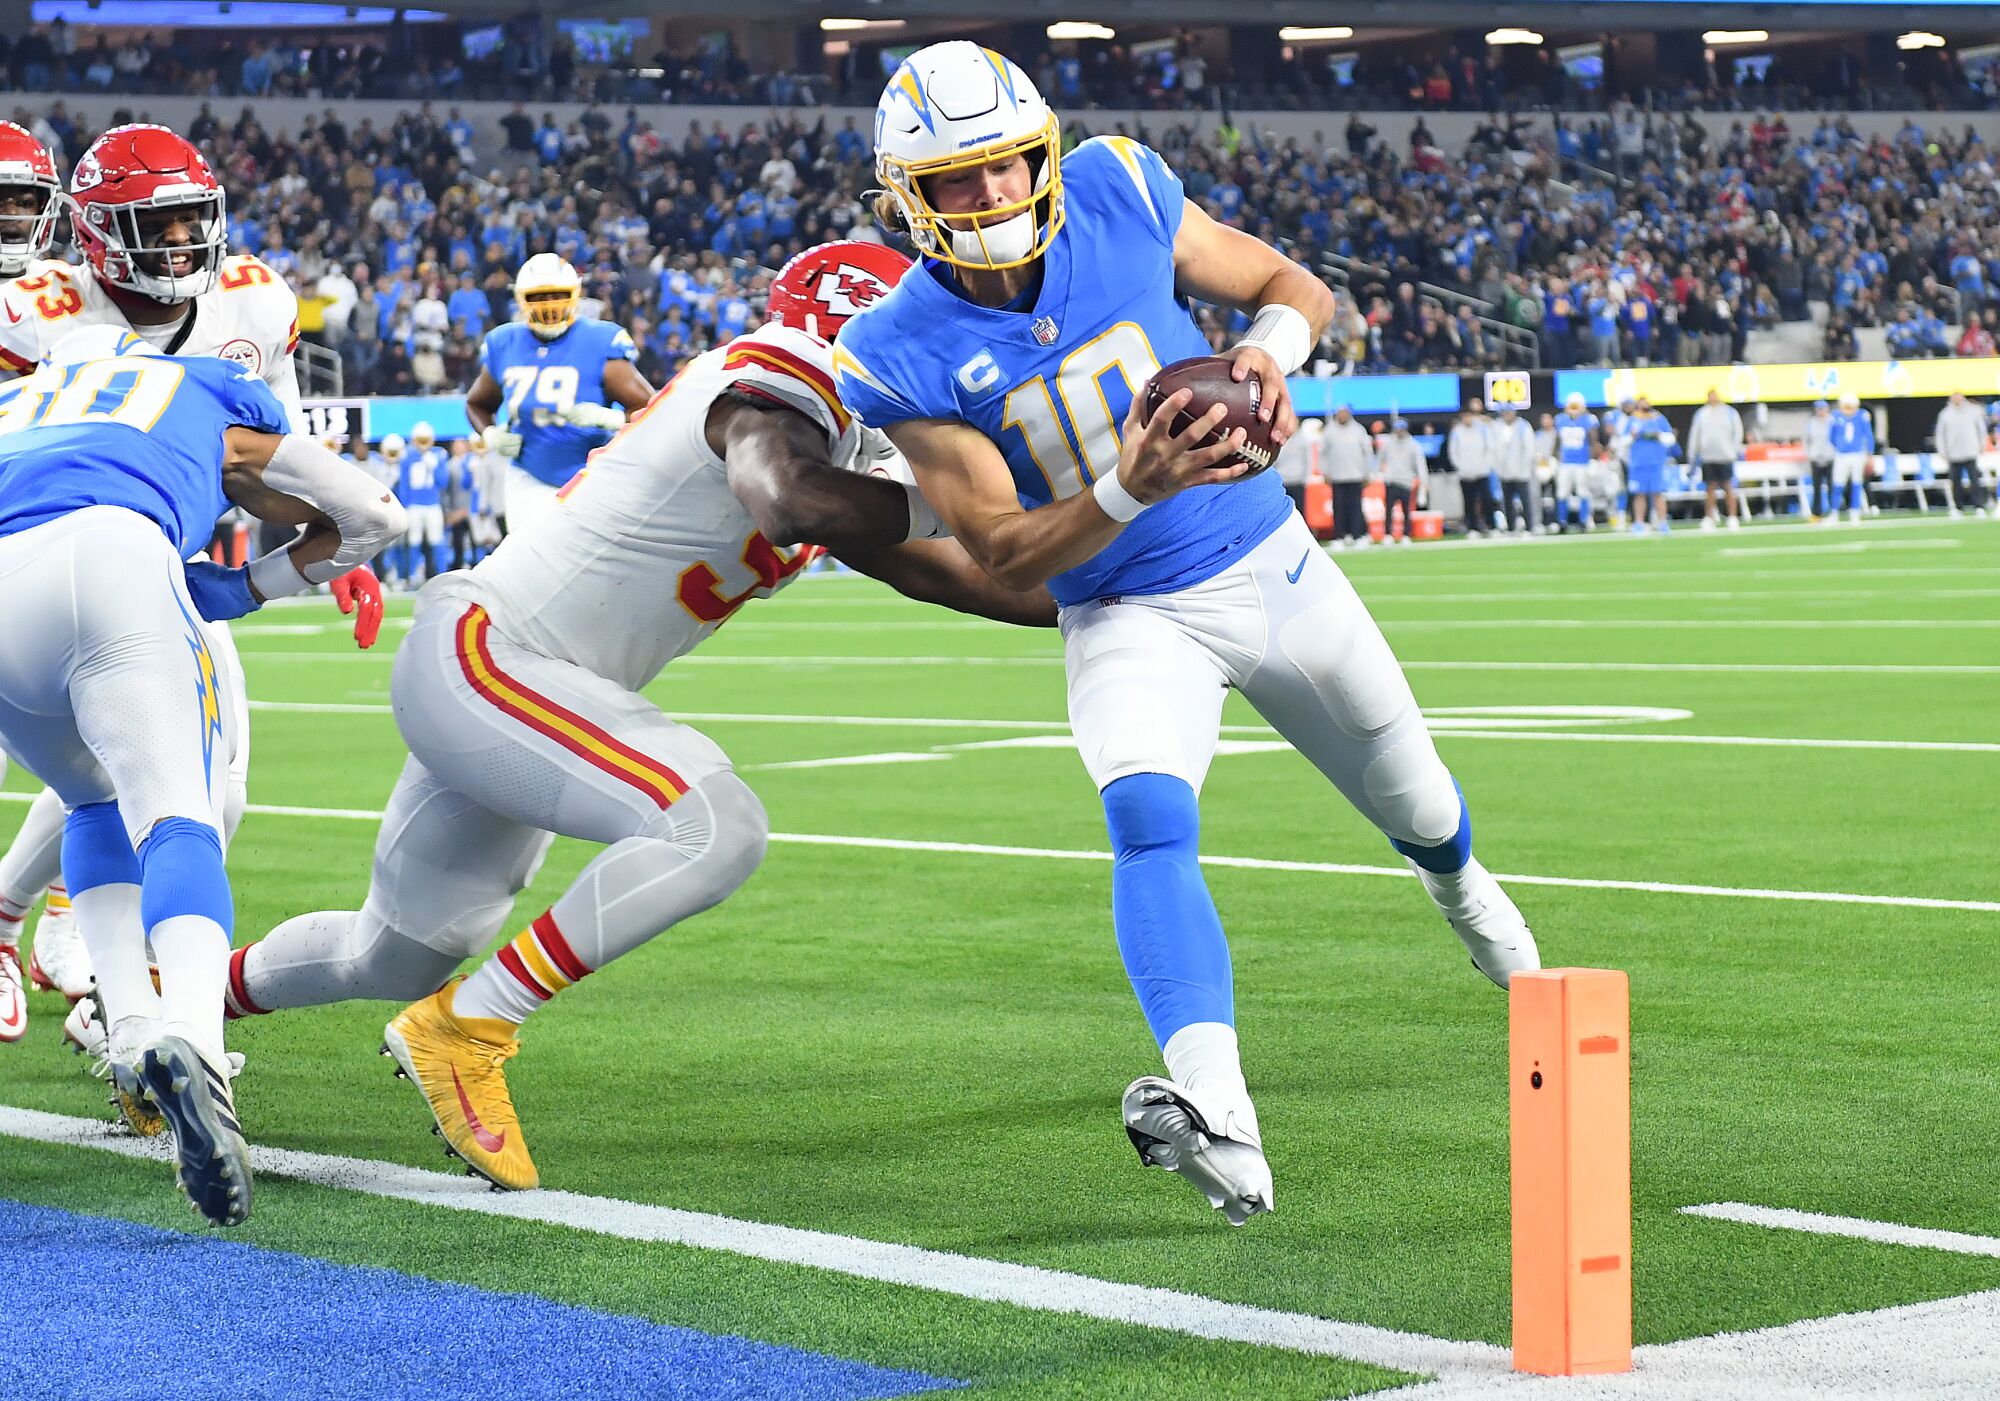 Chargers quarterback Justin Herbert beats the Chiefs defense to score a touchdown in the second quarter.